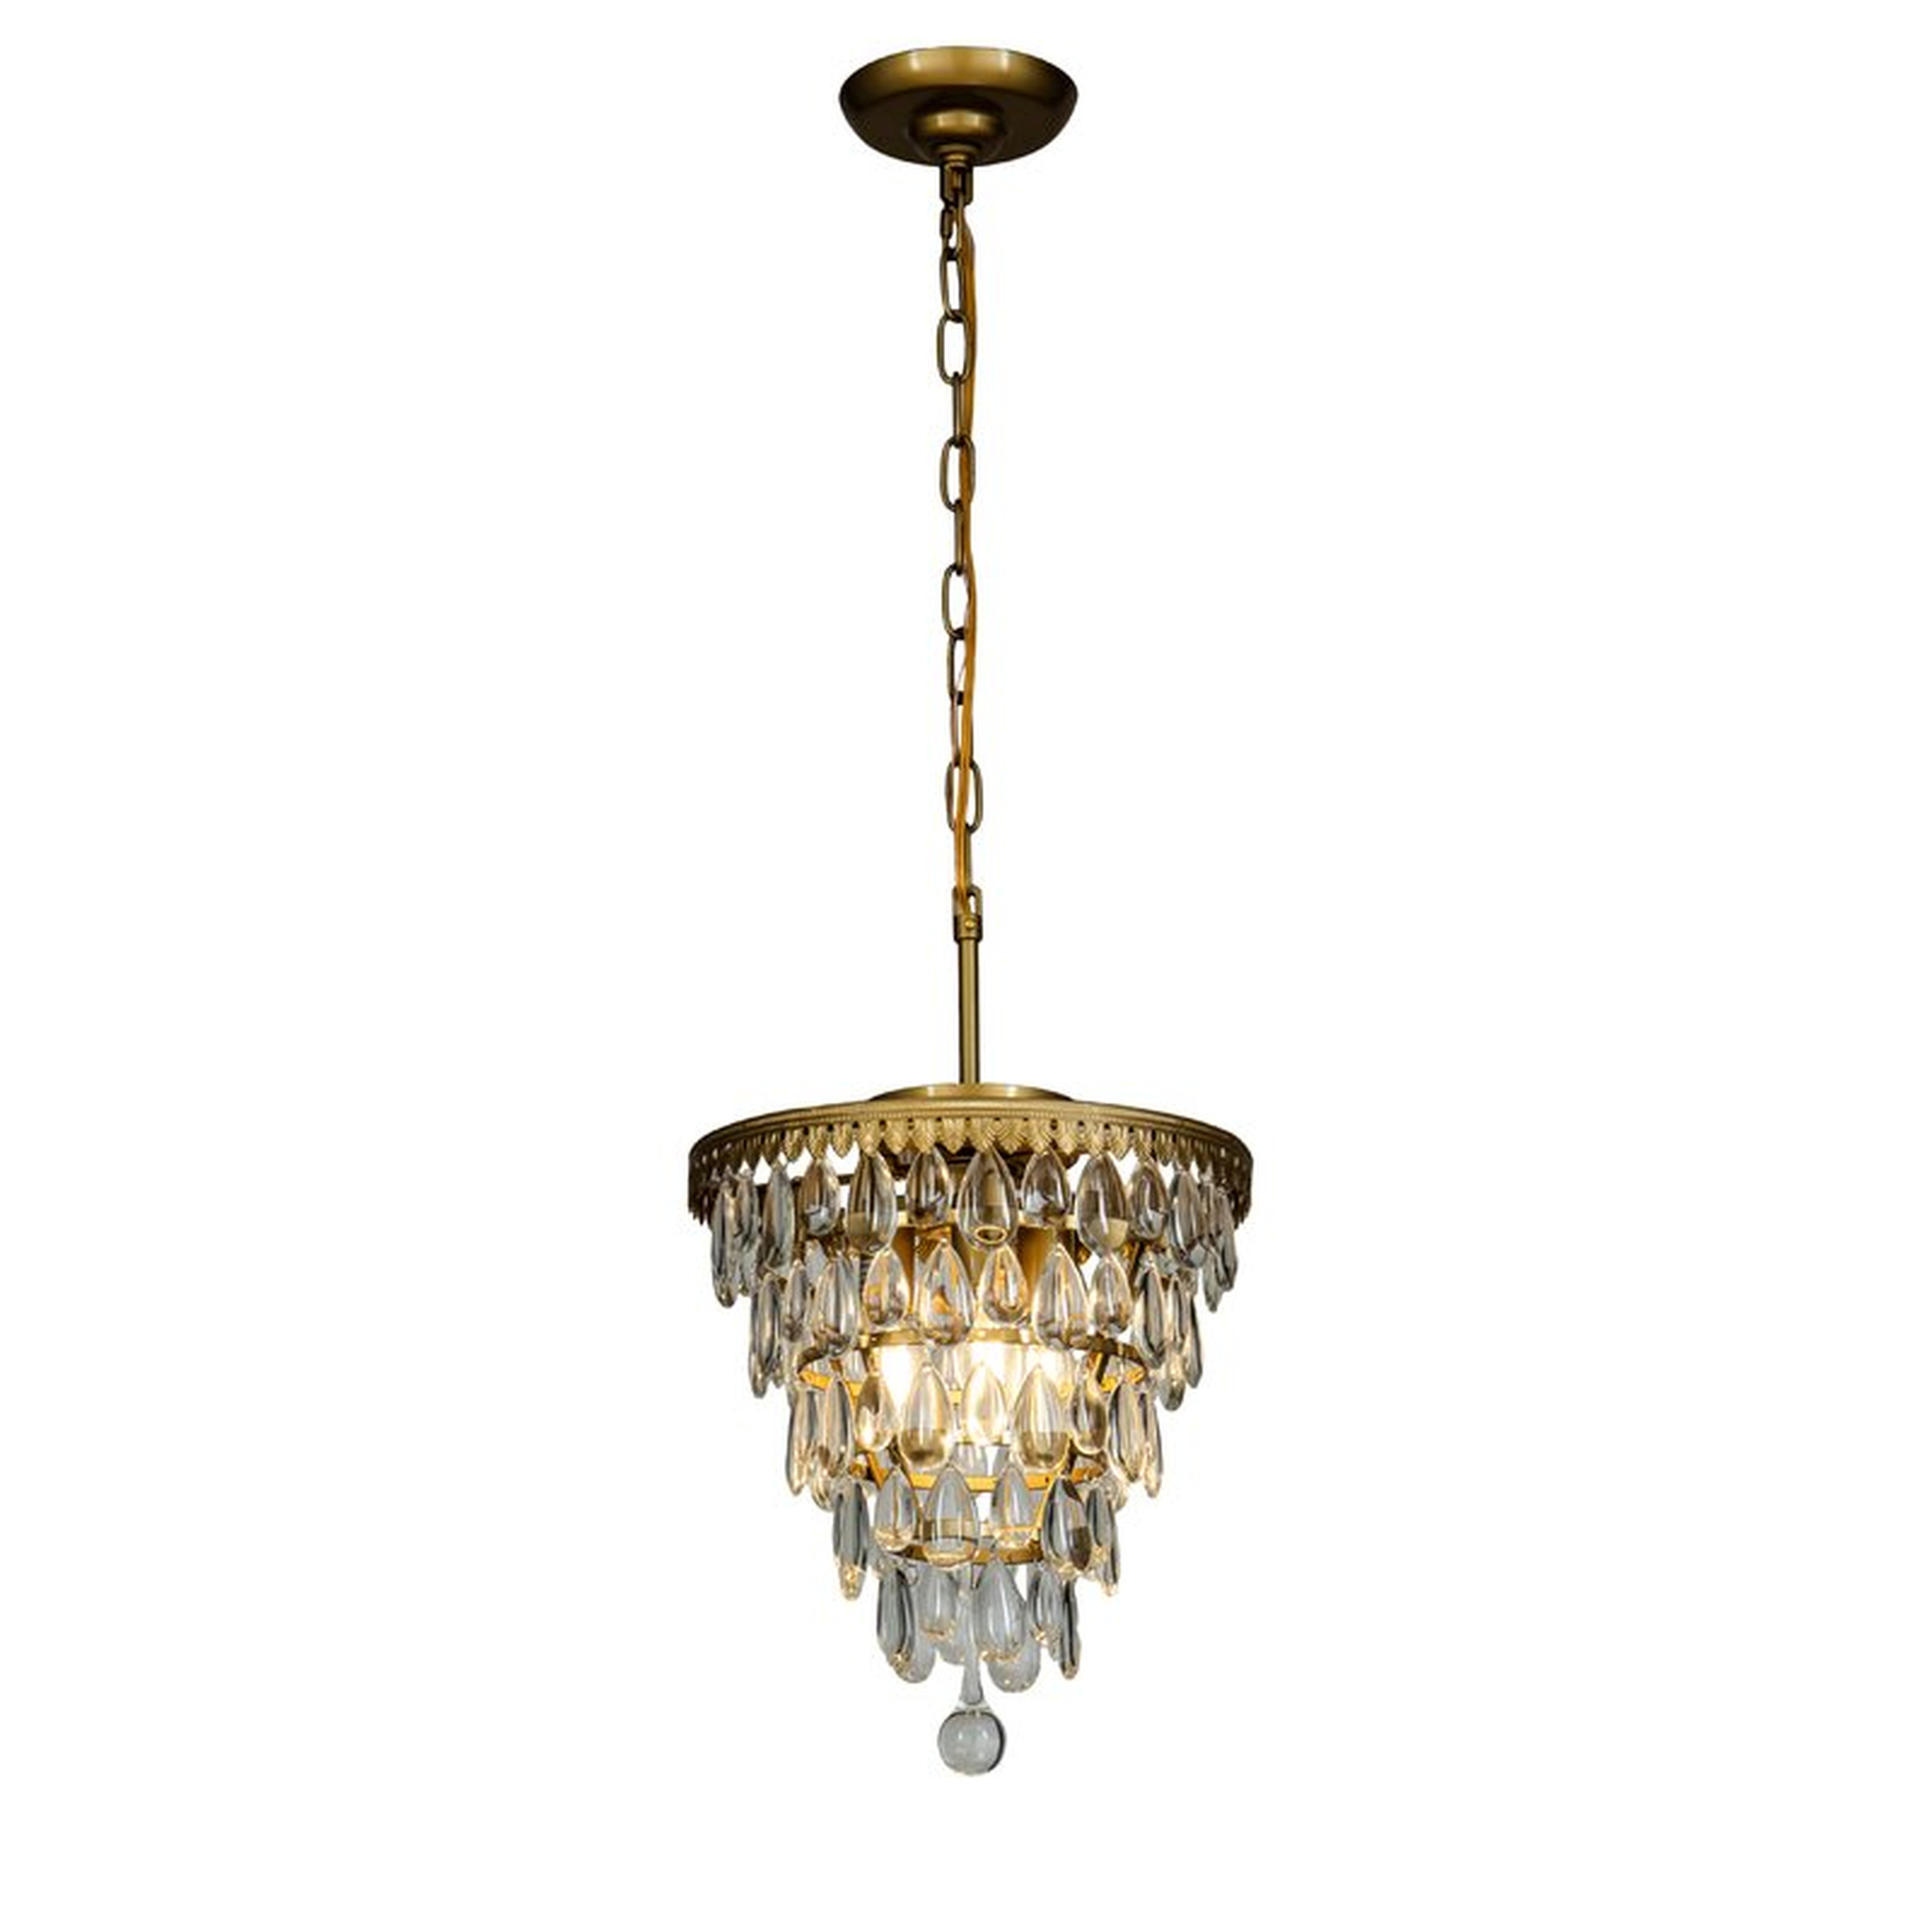 Wyndham 3-Light Unique Tiered Chandelier with Wrought Iron Accents - Wayfair